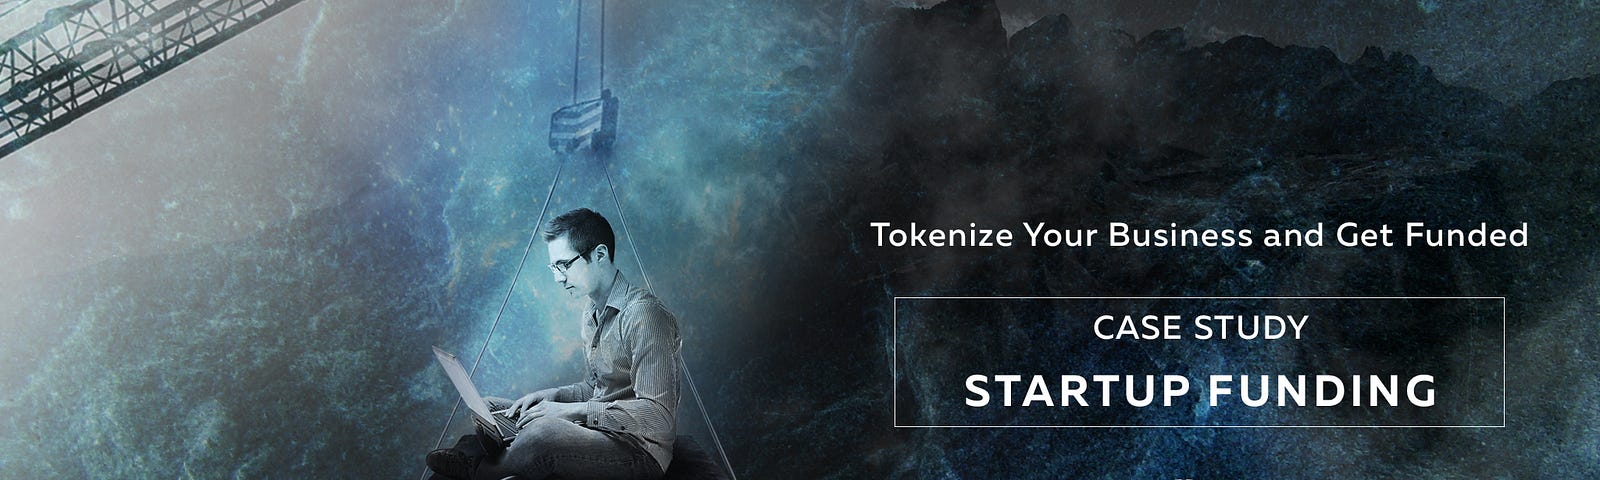 Tokenize Your Business and Get Funded